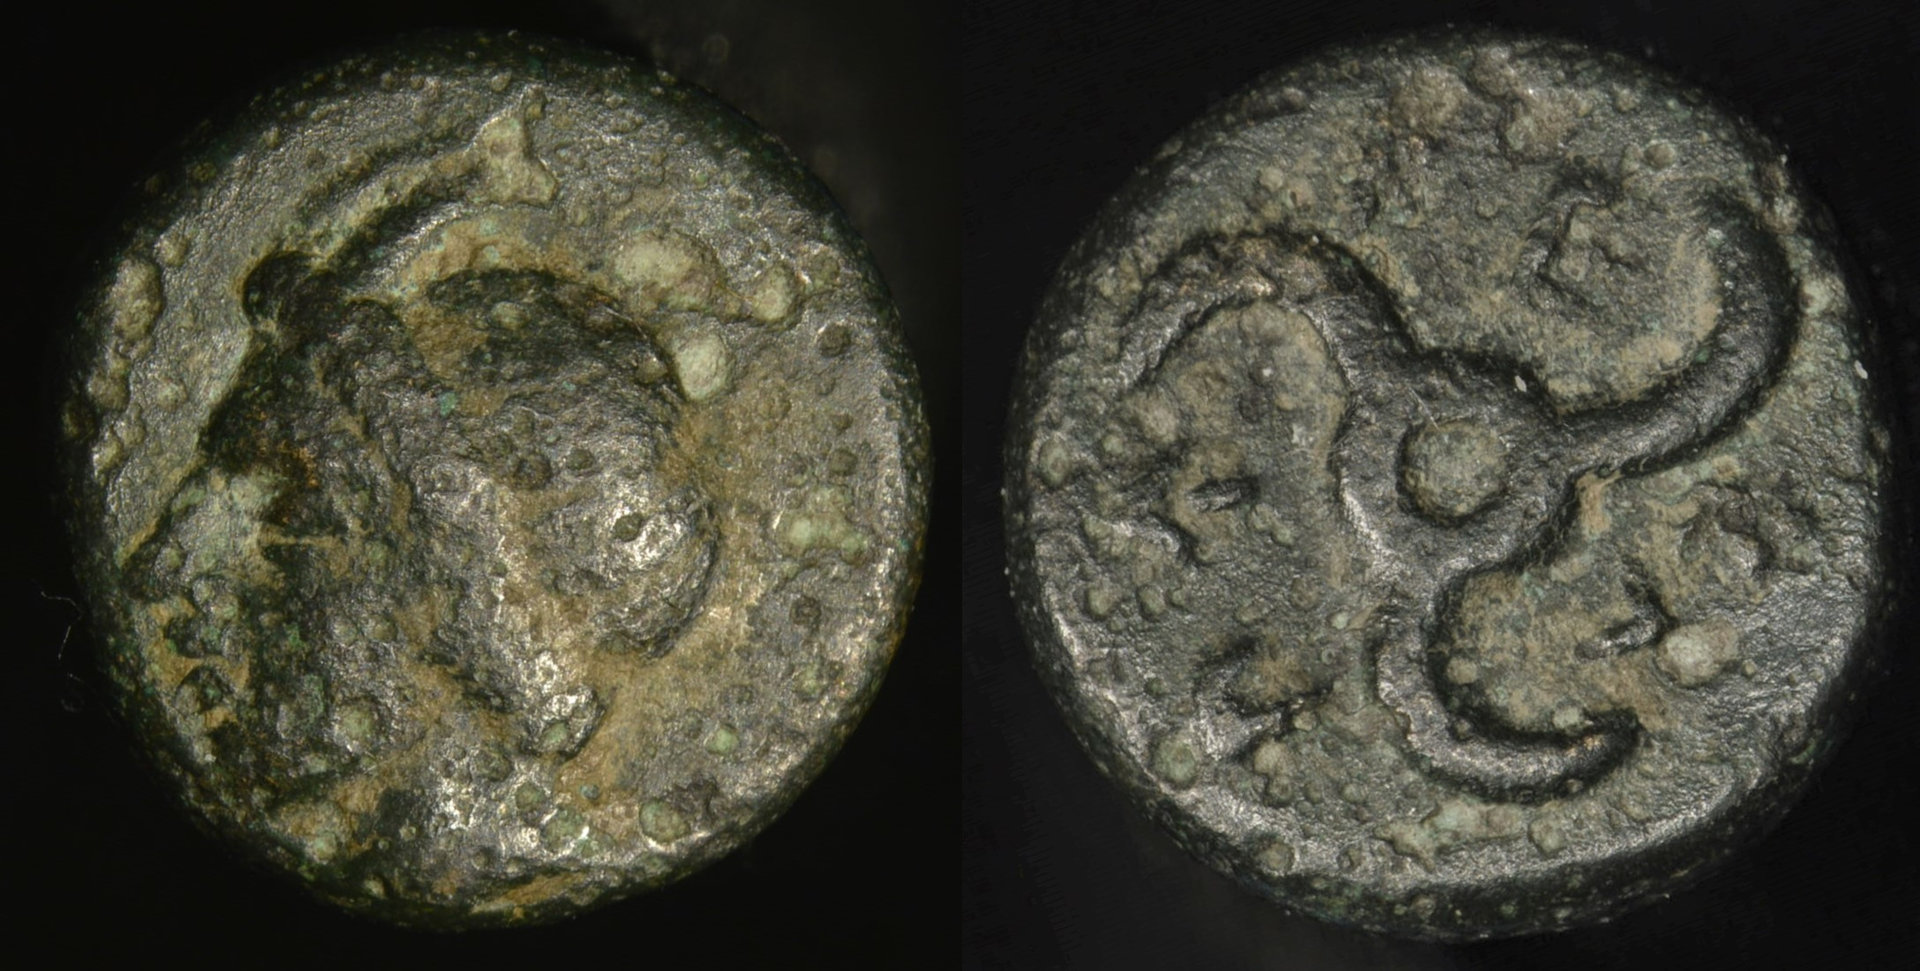 [11110] Dynasts of Lycia (Perikles, c 380-360 BC) - Uncertain mint (AE11, 380-360 BC).jpg